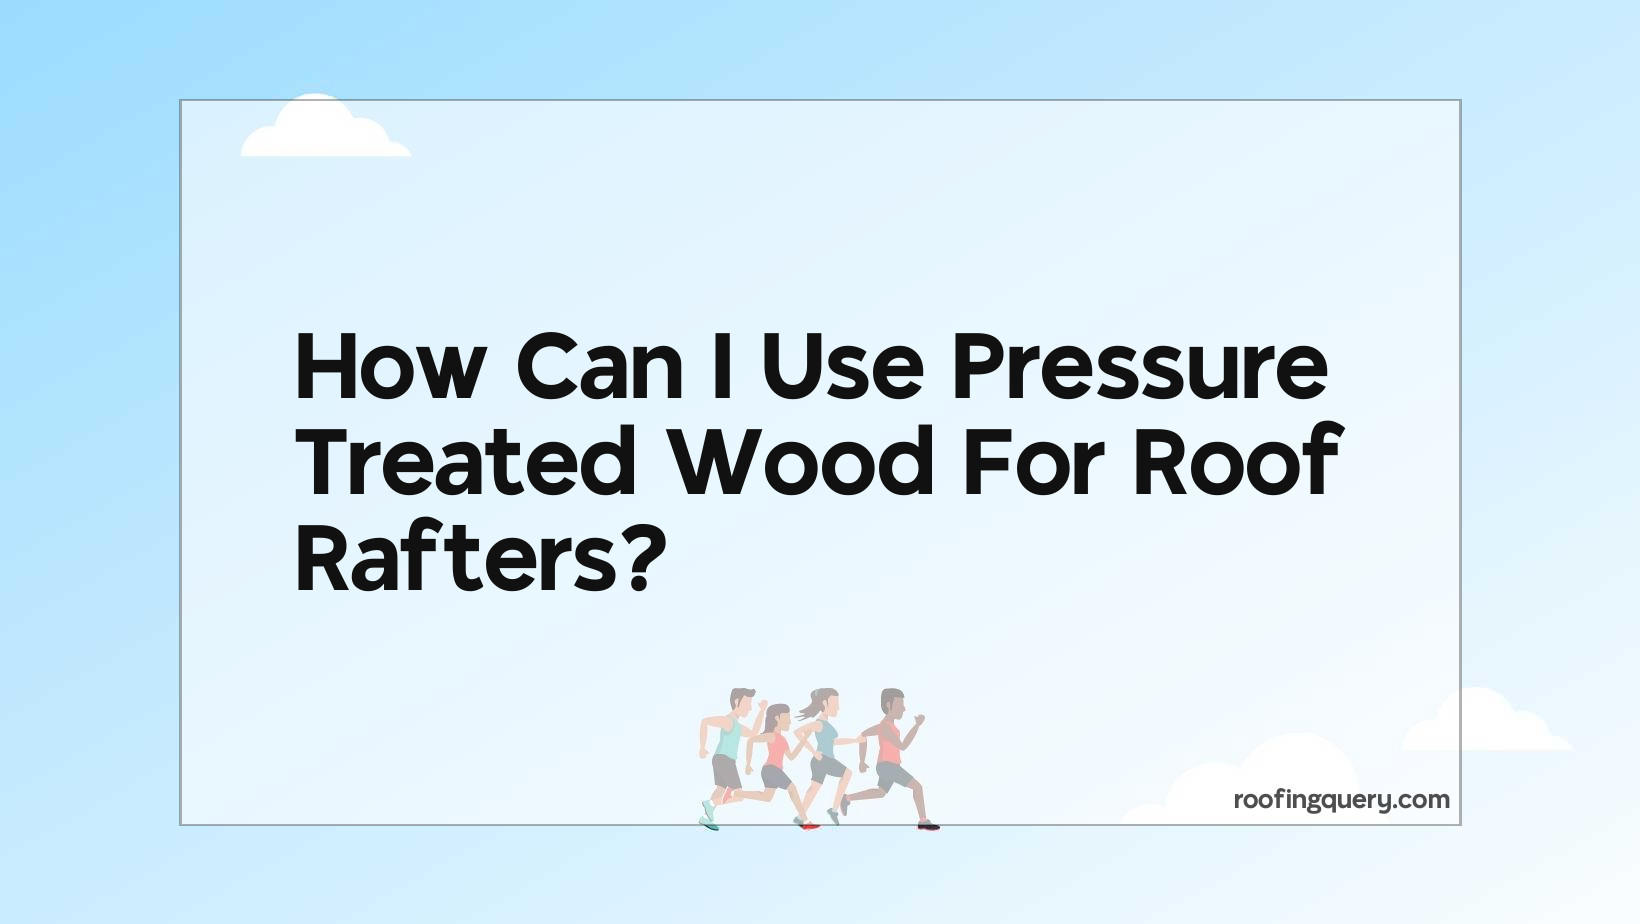 How Can I Use Pressure Treated Wood For Roof Rafters?